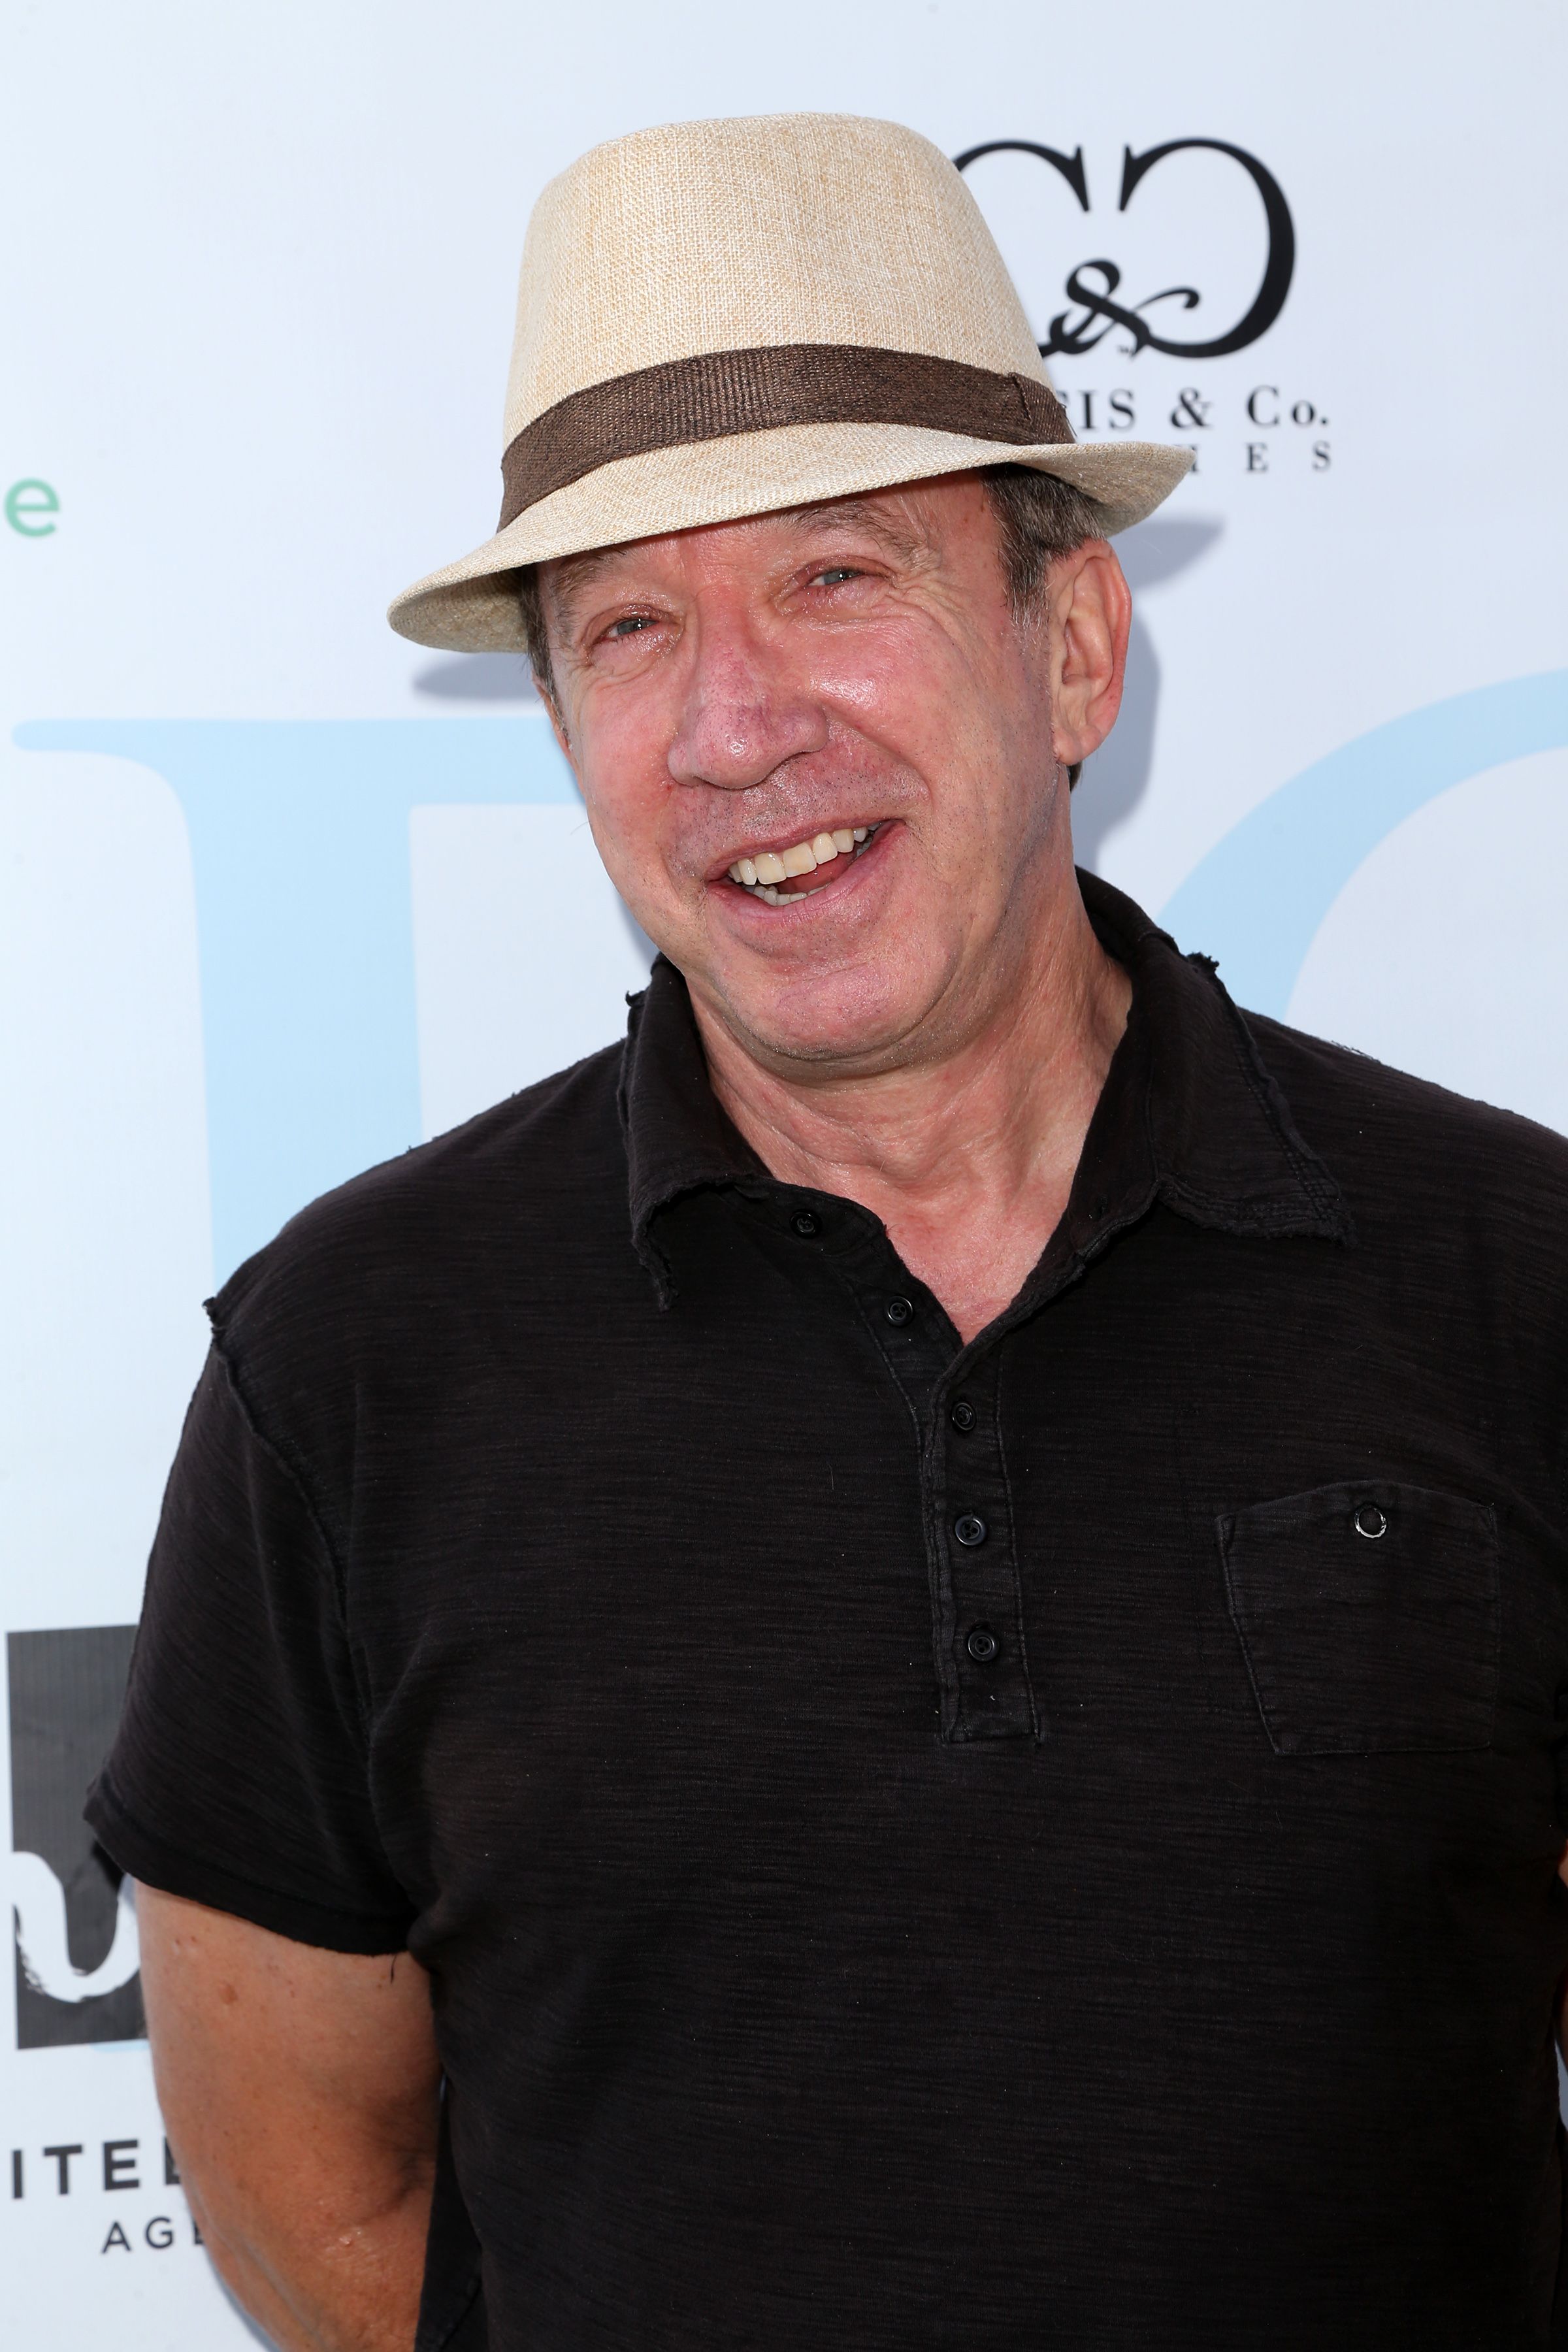 Tim Allen is 'Very Interested' in a 2400 x 3600